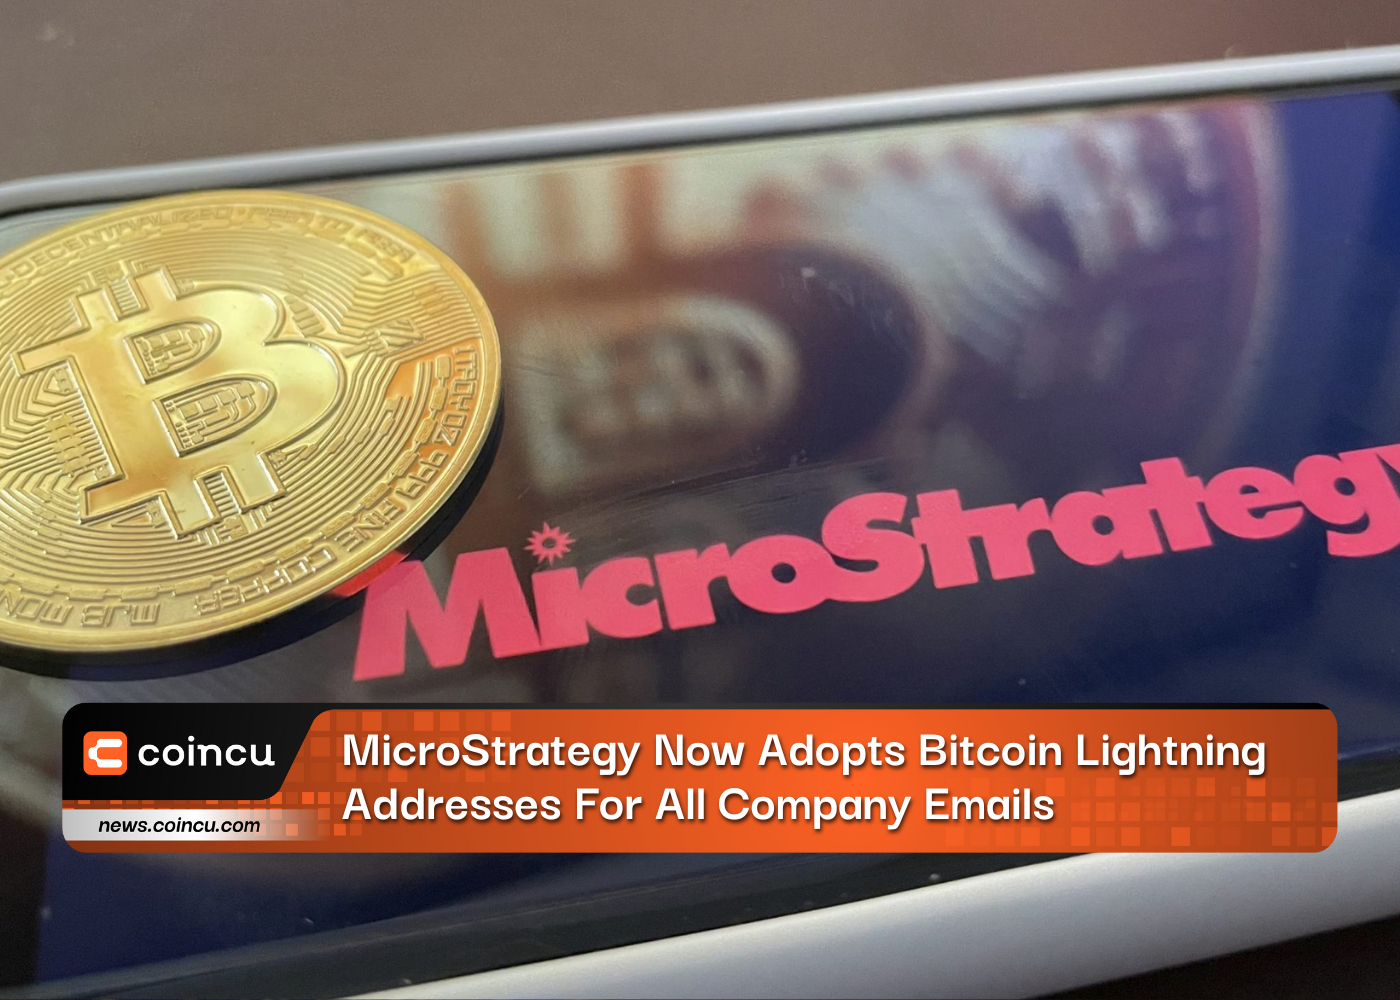 MicroStrategy Now Adopts Bitcoin Lightning Addresses For All Company Emails